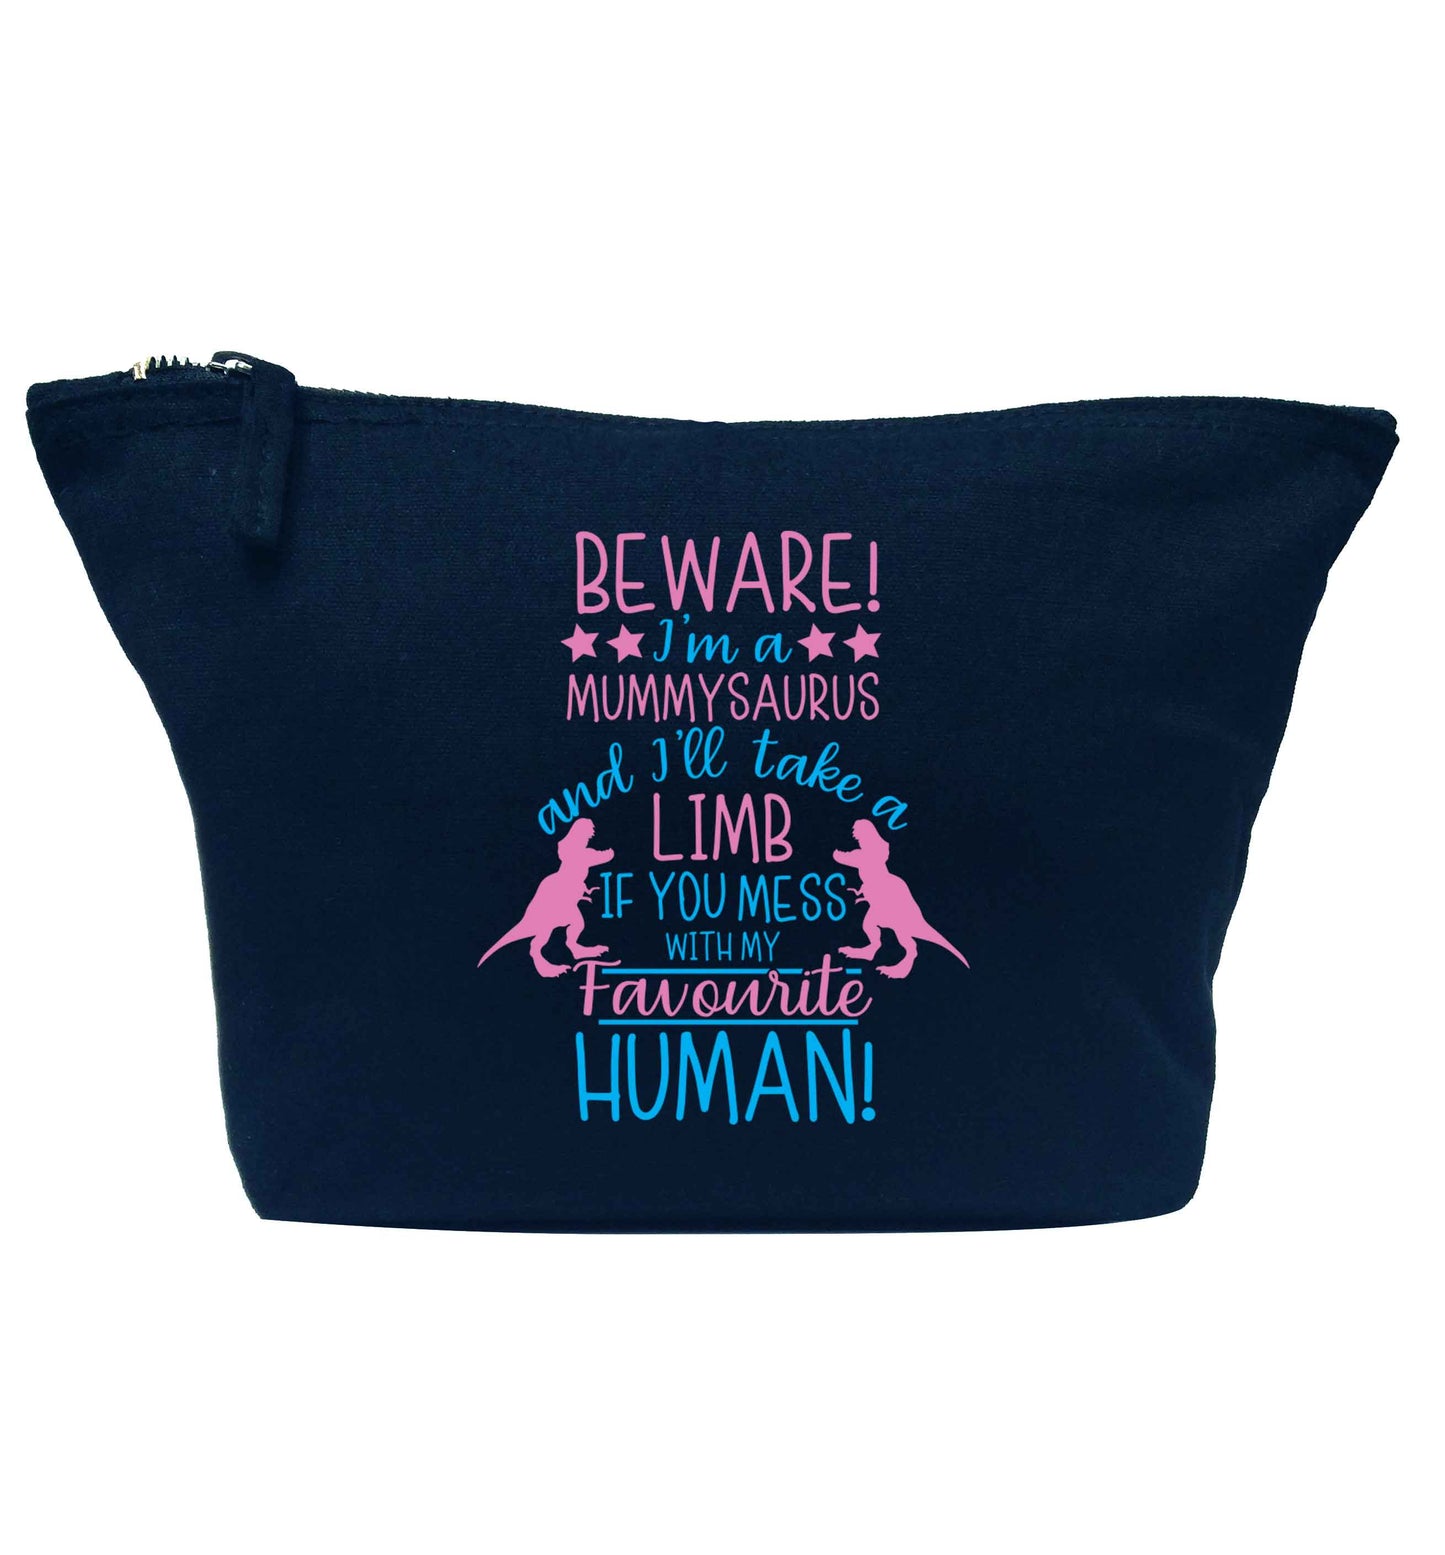 Perfect gift for any protective mummysaurus! Beware I'm a mummysaurus and I'll take a limb if you mess with my favourite human navy makeup bag